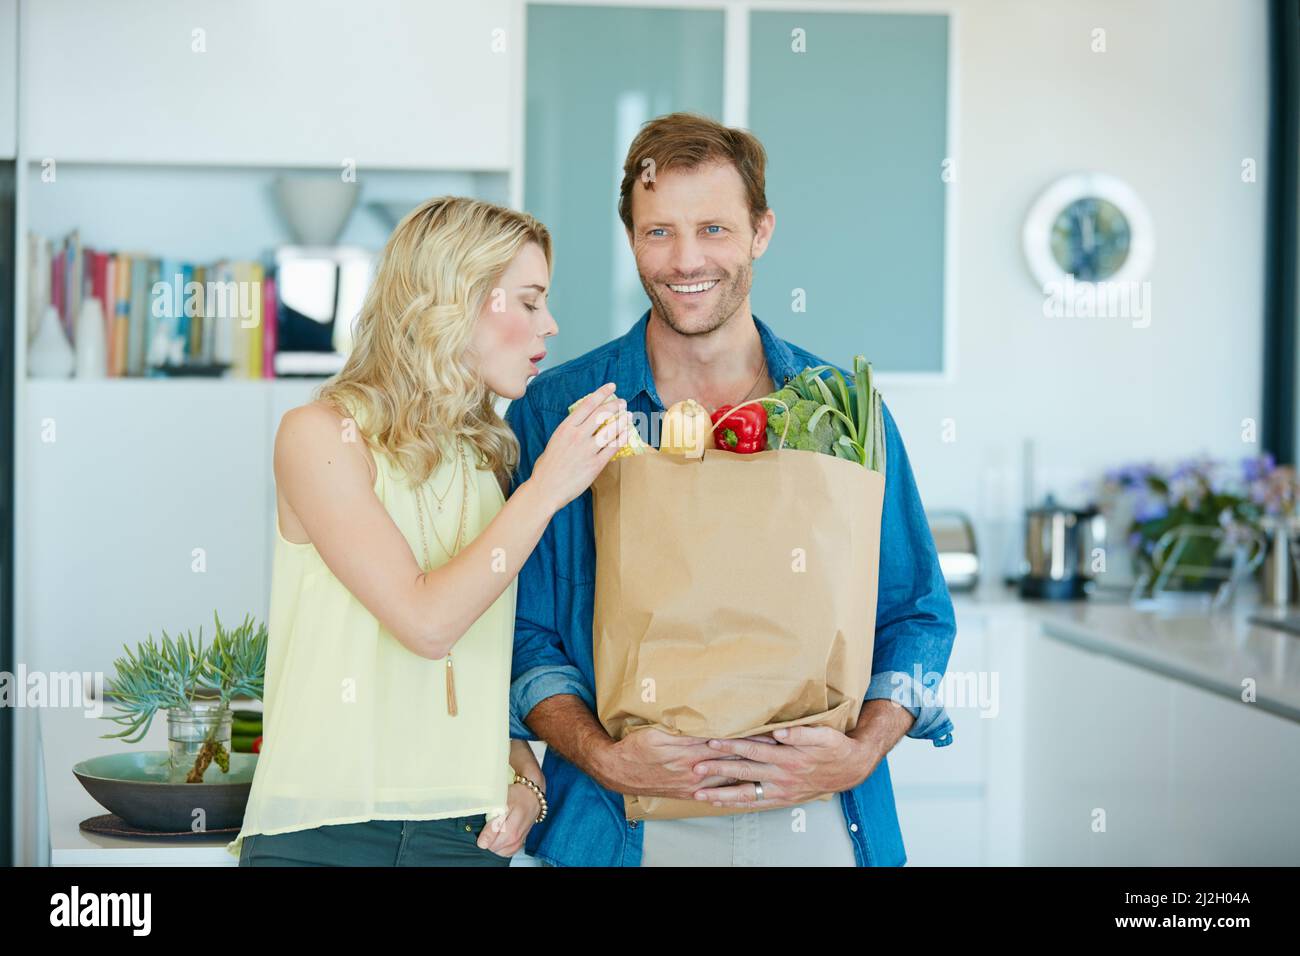 The healthy couple is a happy couple. Shot of a happy couple holding a bag full of healthy groceries at home. Stock Photo